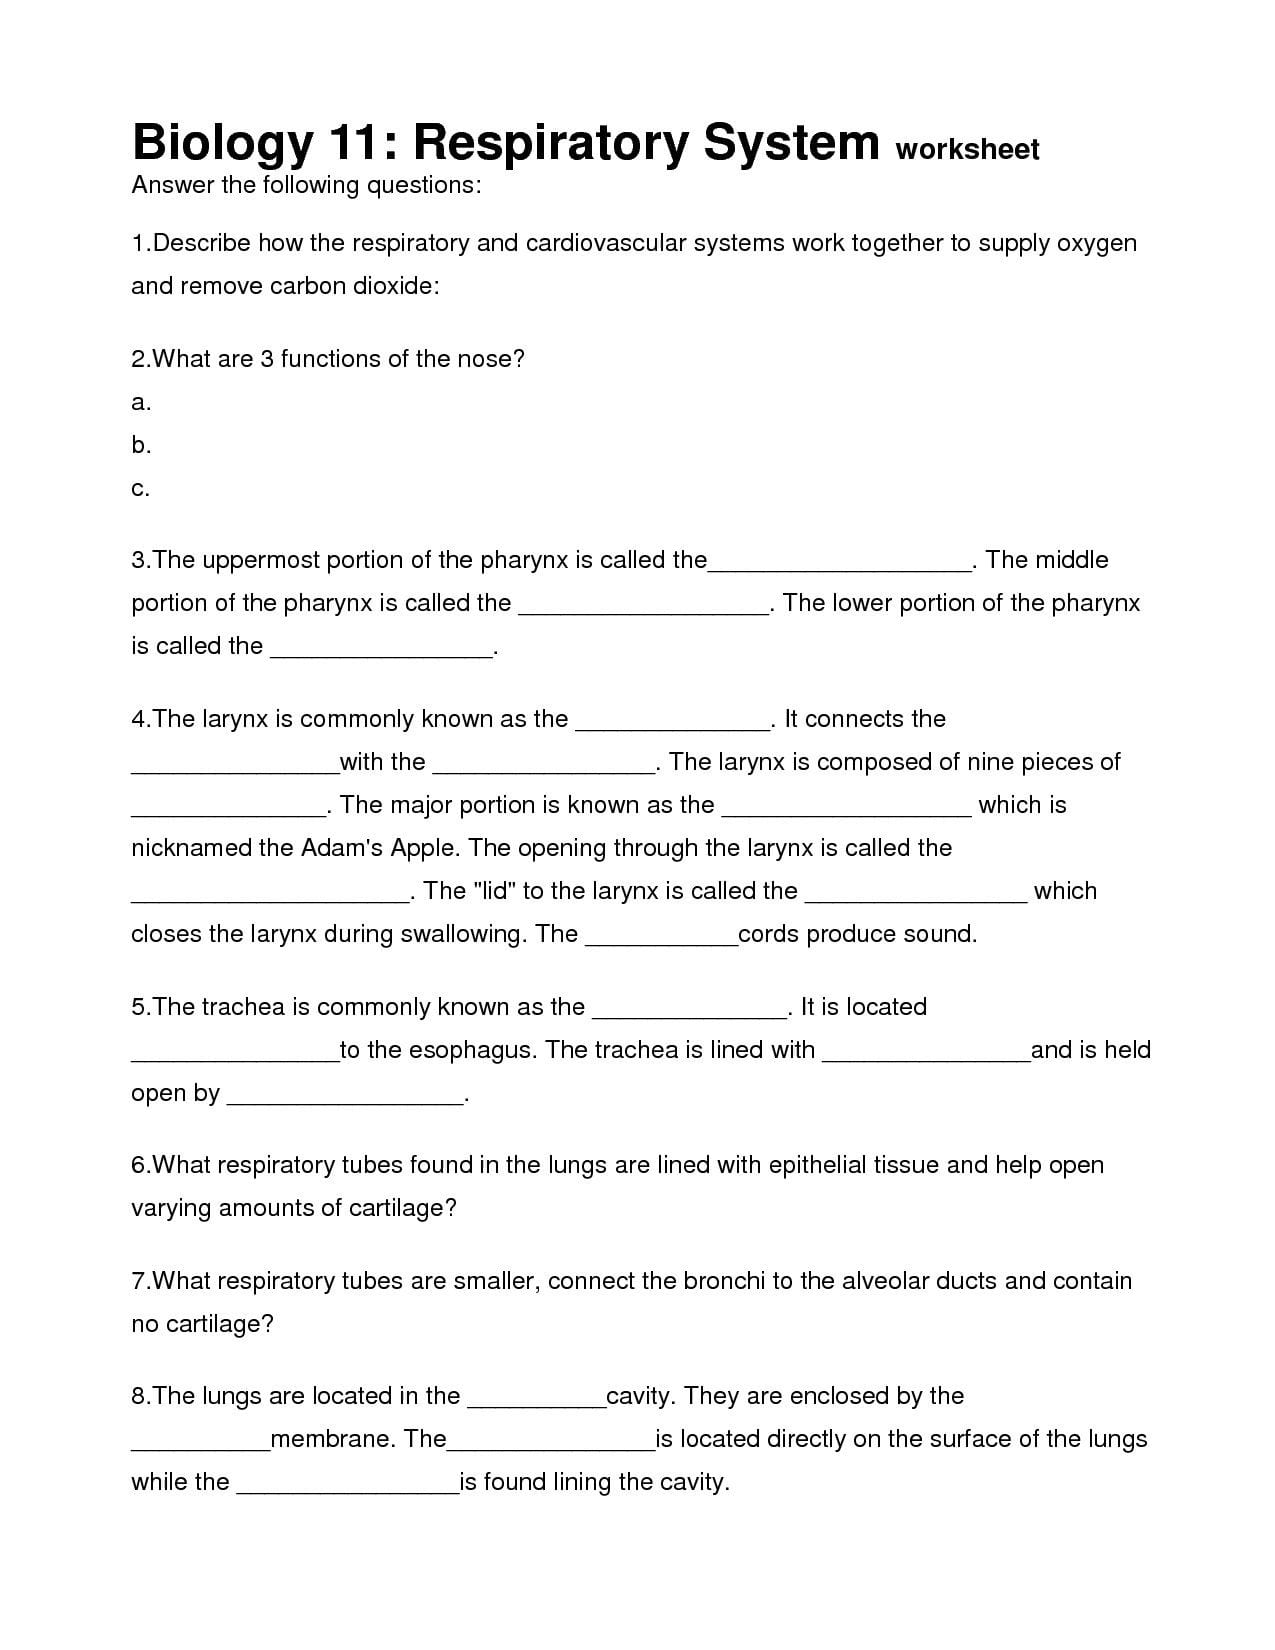 circulatory-and-respiratory-system-worksheet-db-excel